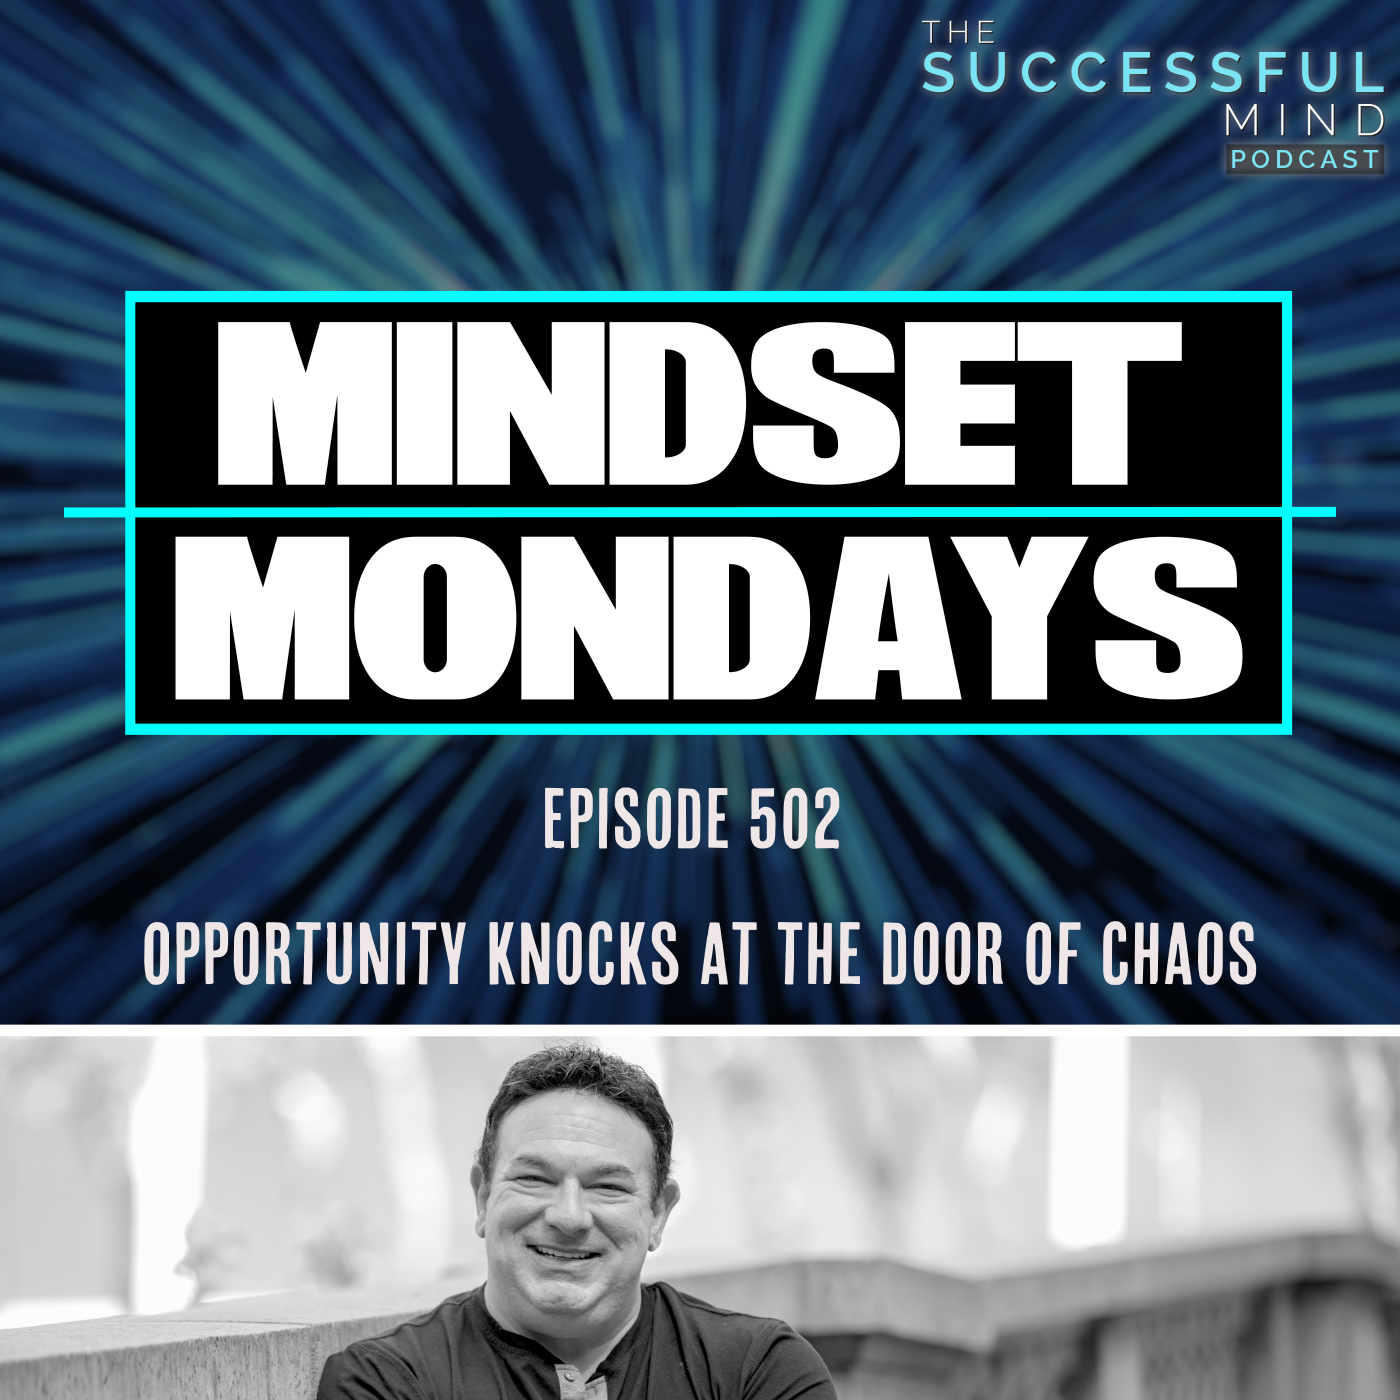 The Successful Mind Podcast - Episode 502 - Opportunity Knocks at the Door of Chaos